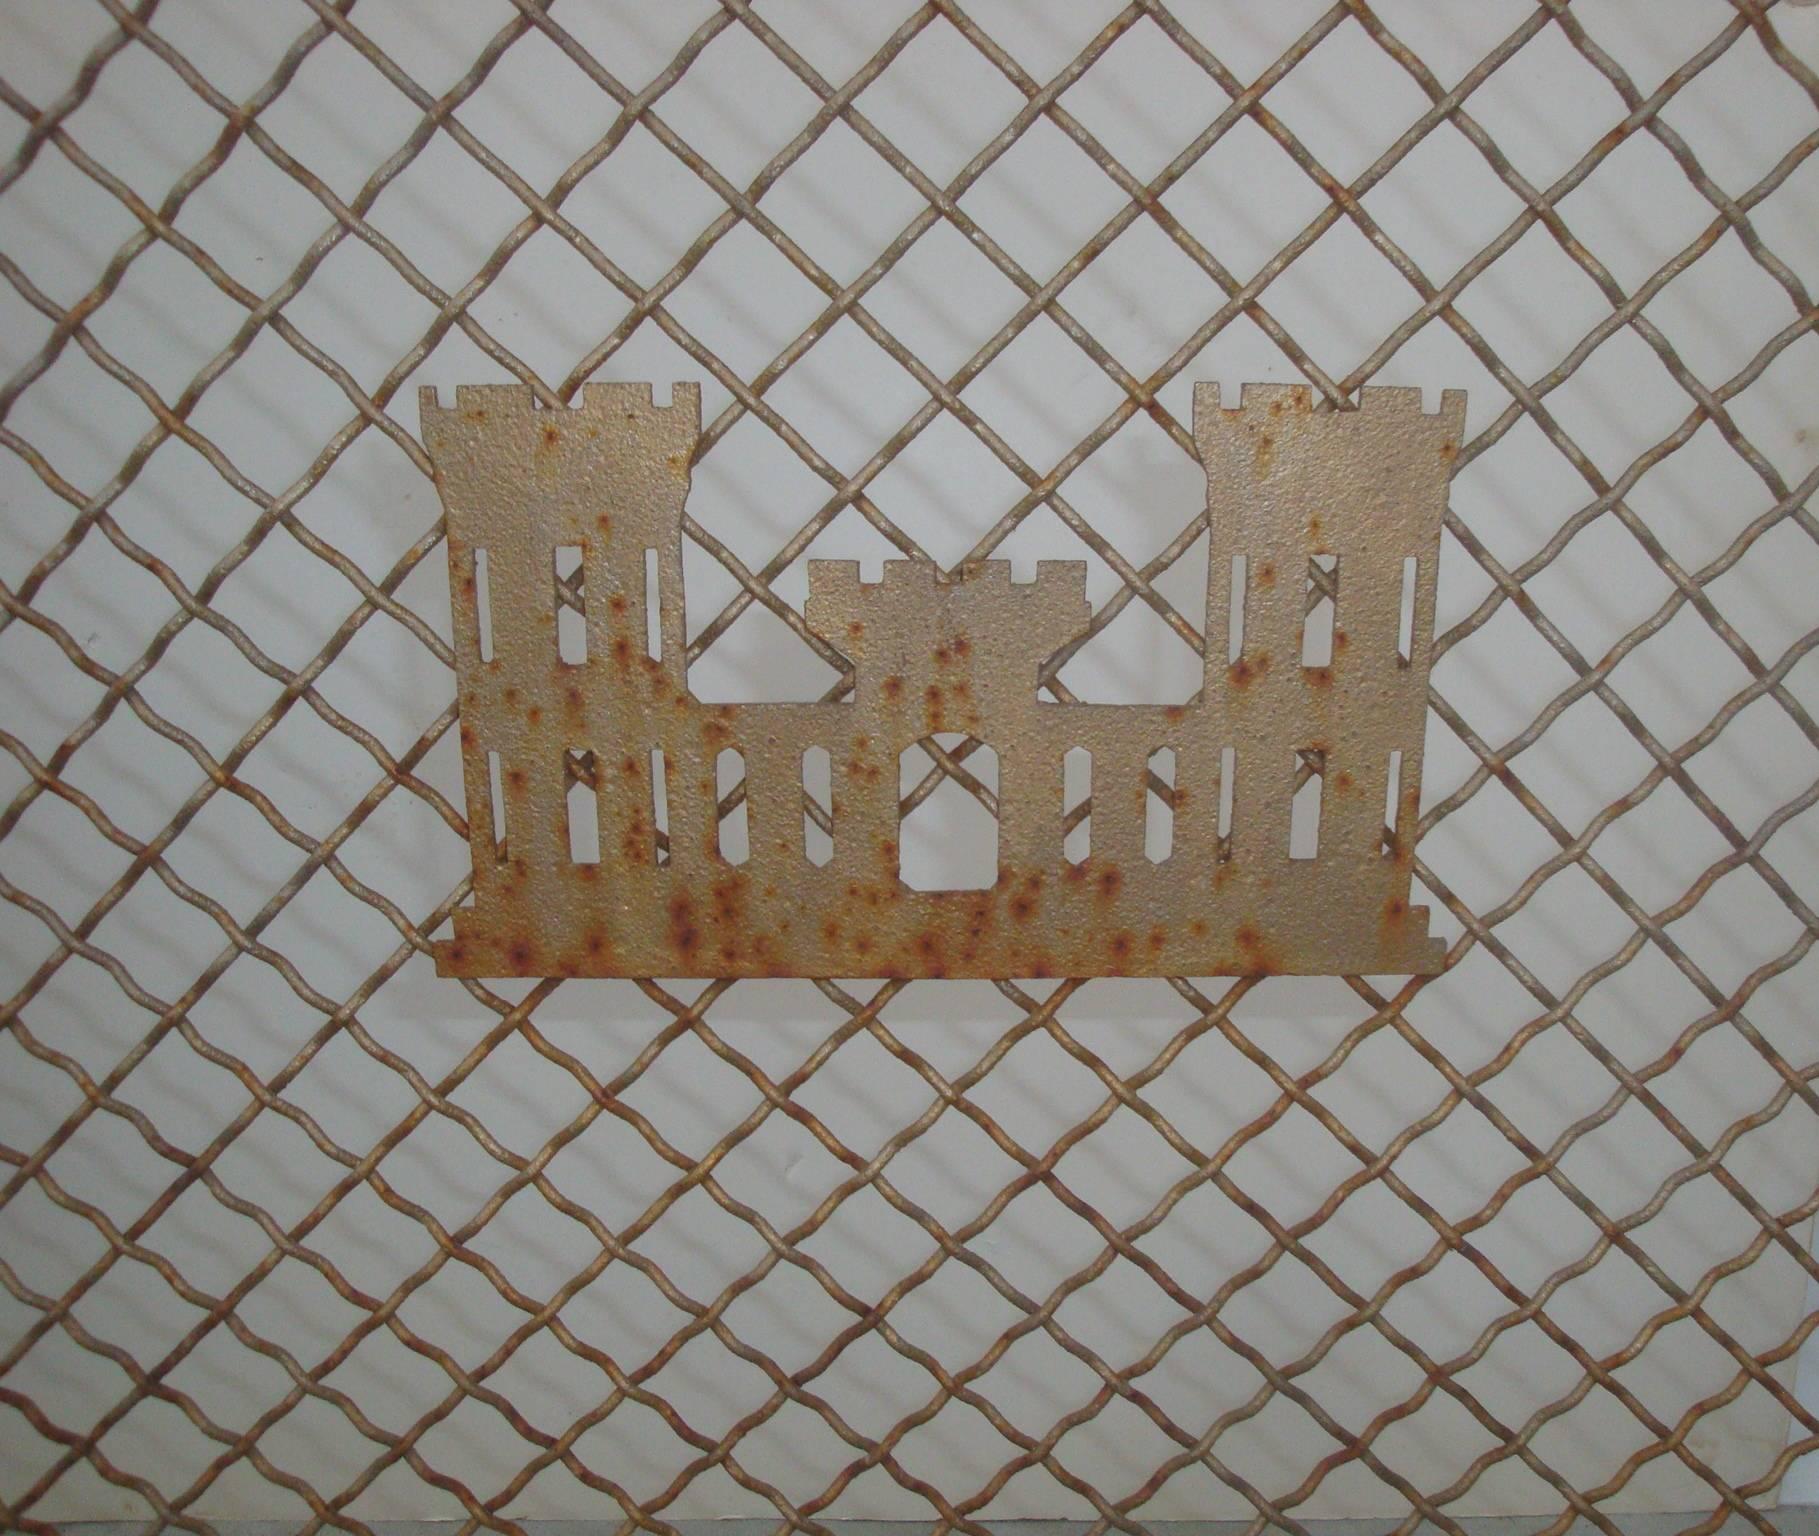 Gothic Early 20th Century Handcrafted Iron Fires Screen with Castle Emblem